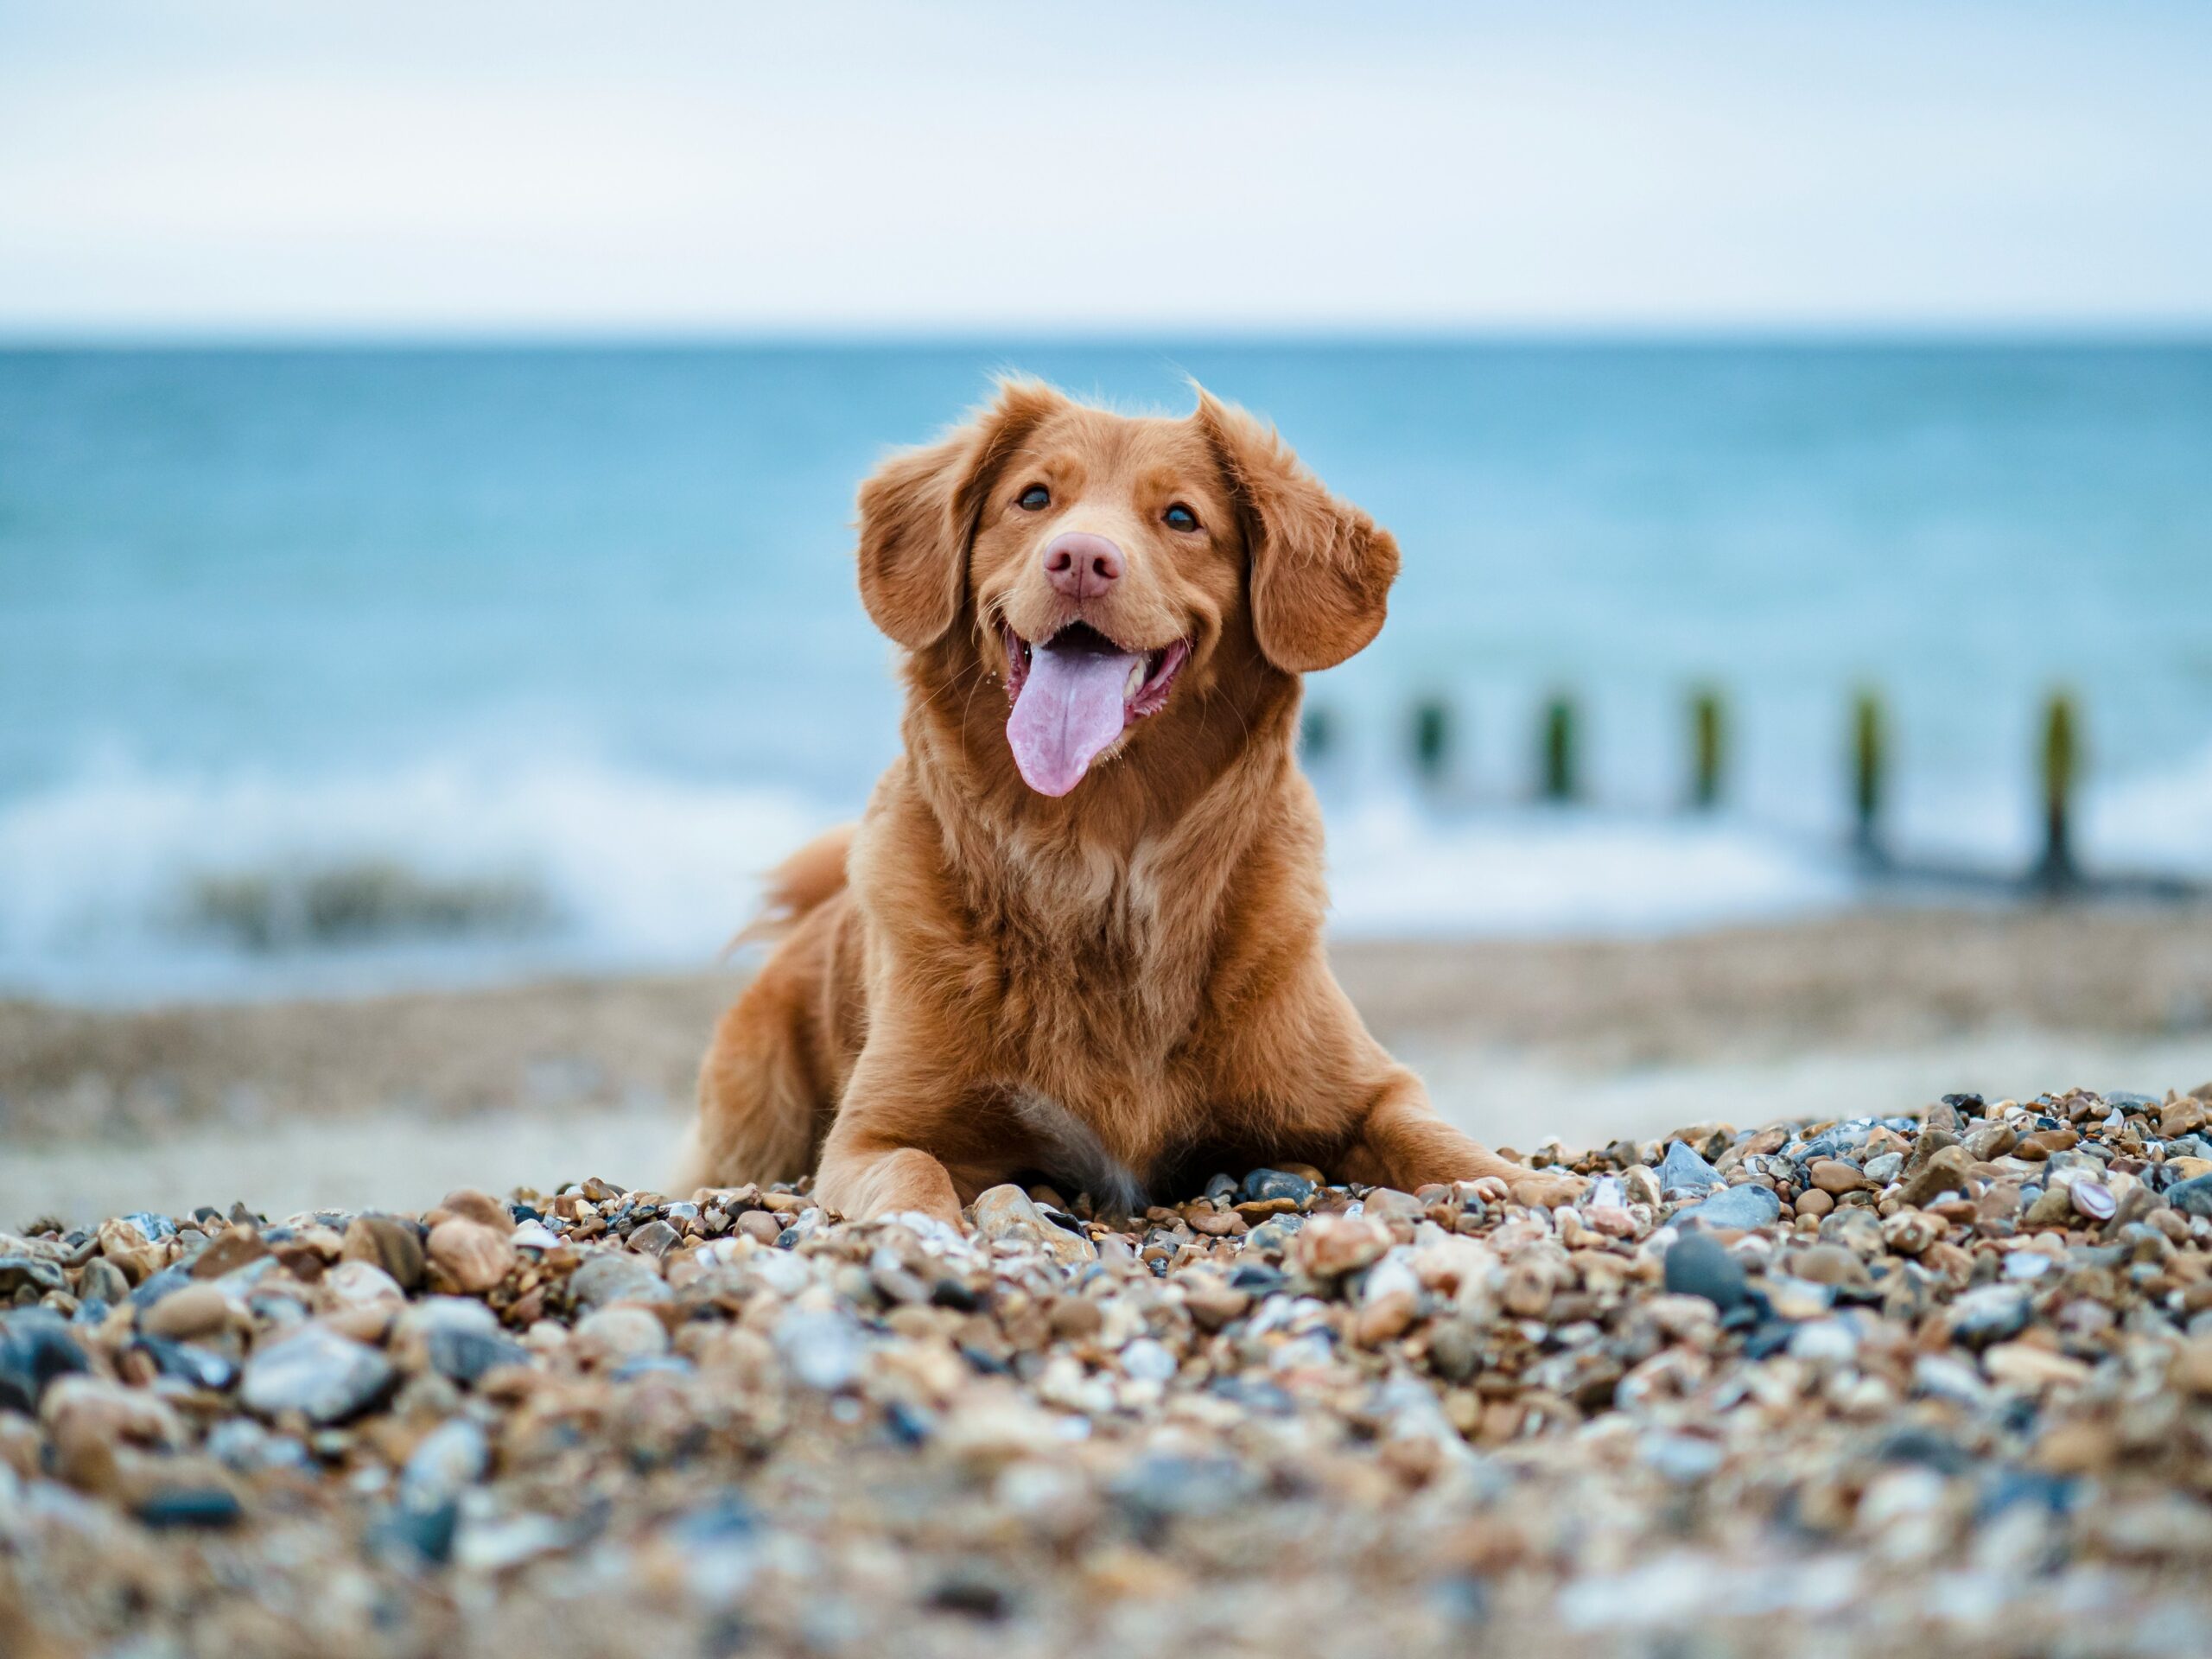 A happy-looking dog sitting on a pebbled beach, the sea is visible in the background